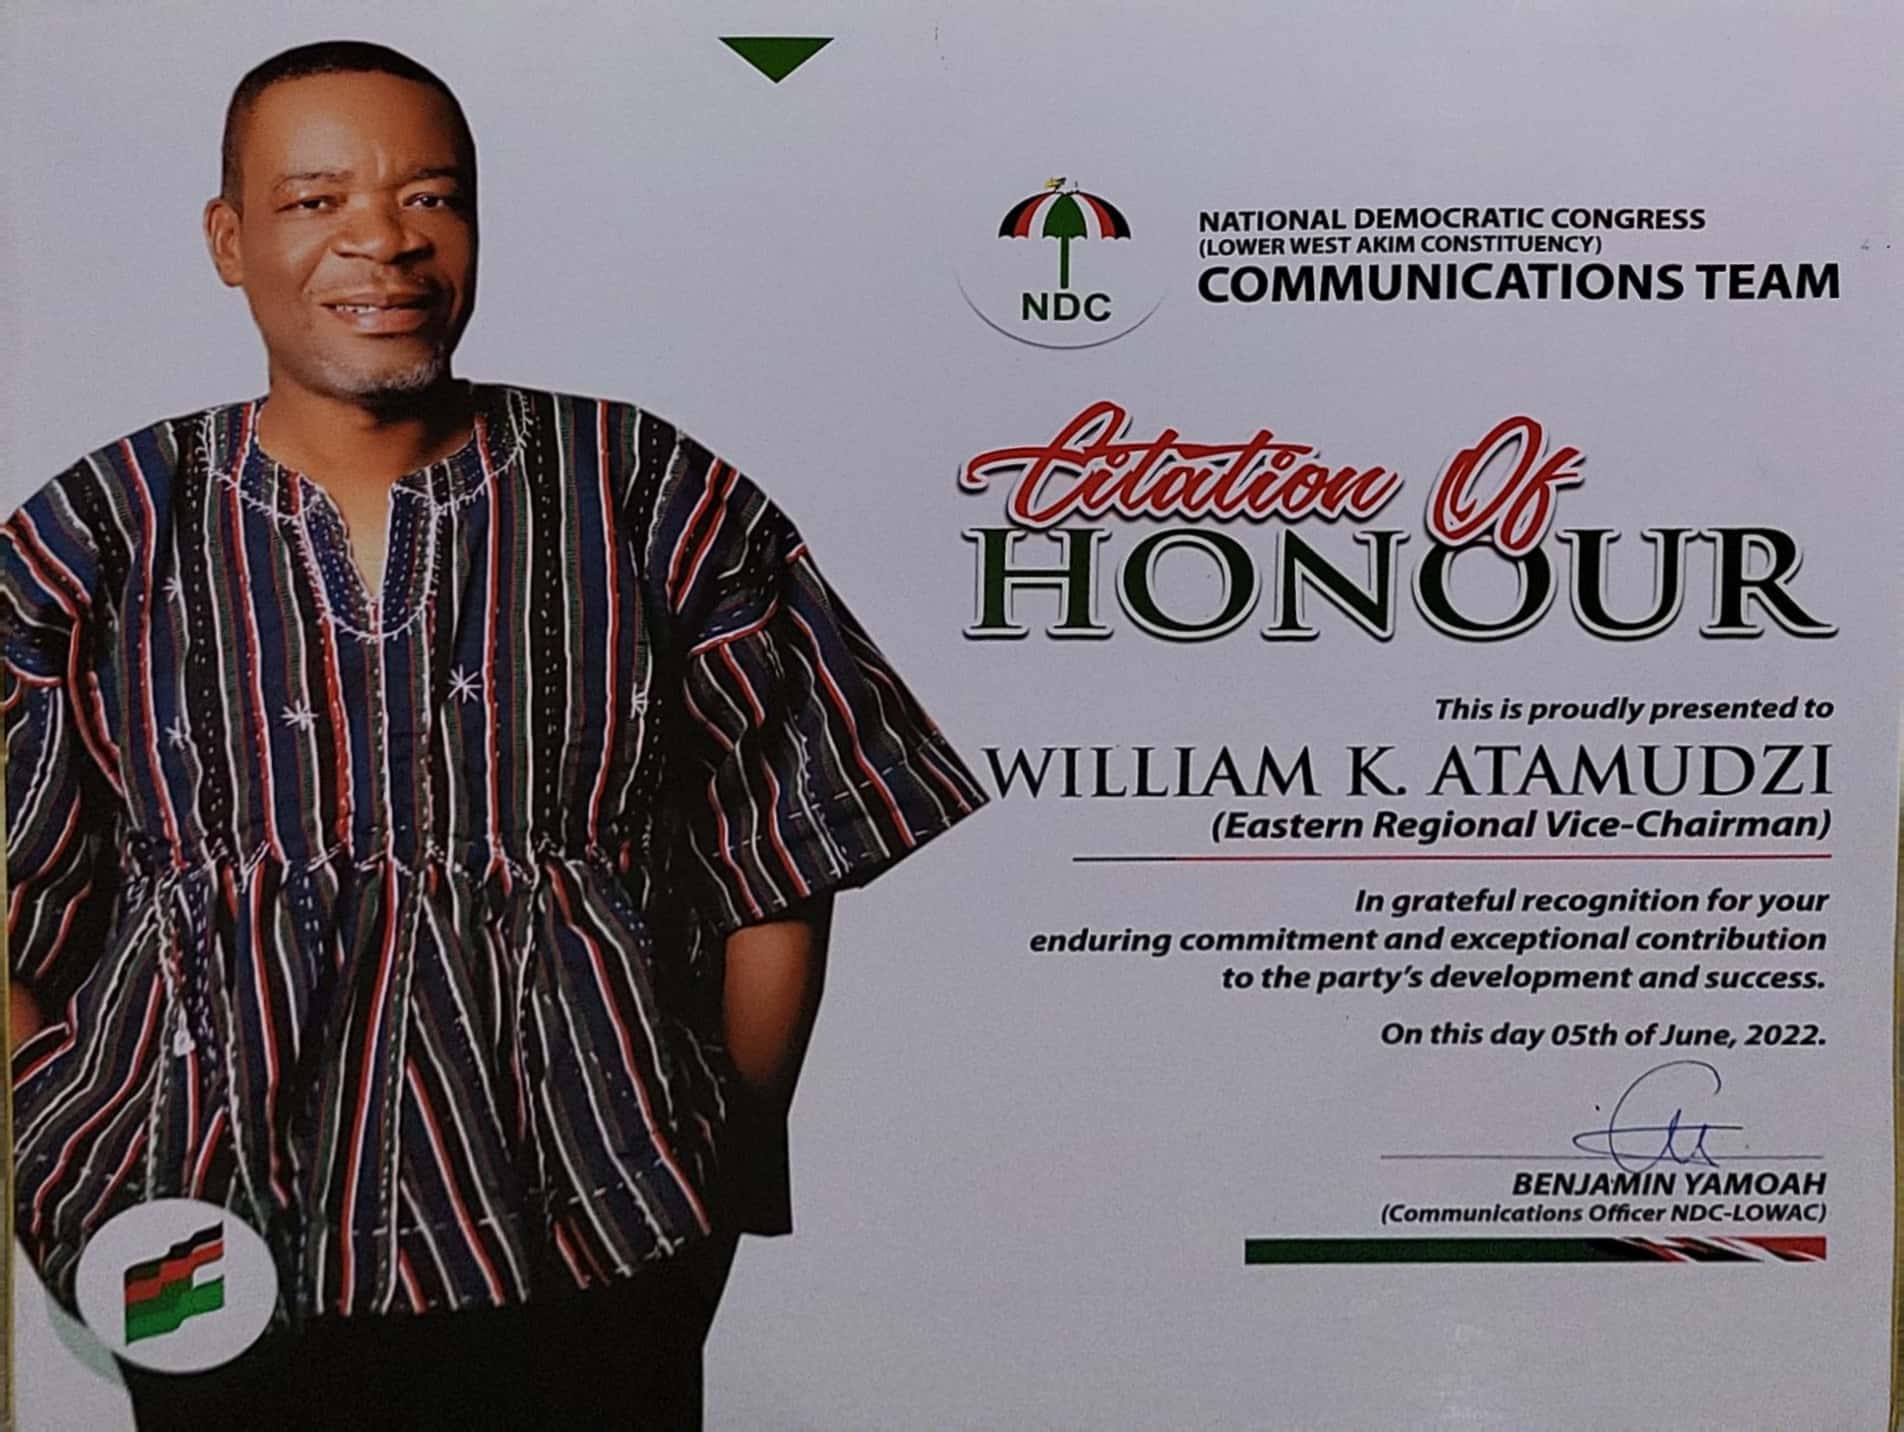 William Atamudzi recognized for his Hardwork and Commitment towards the cause of the NDC in the Eastern Region